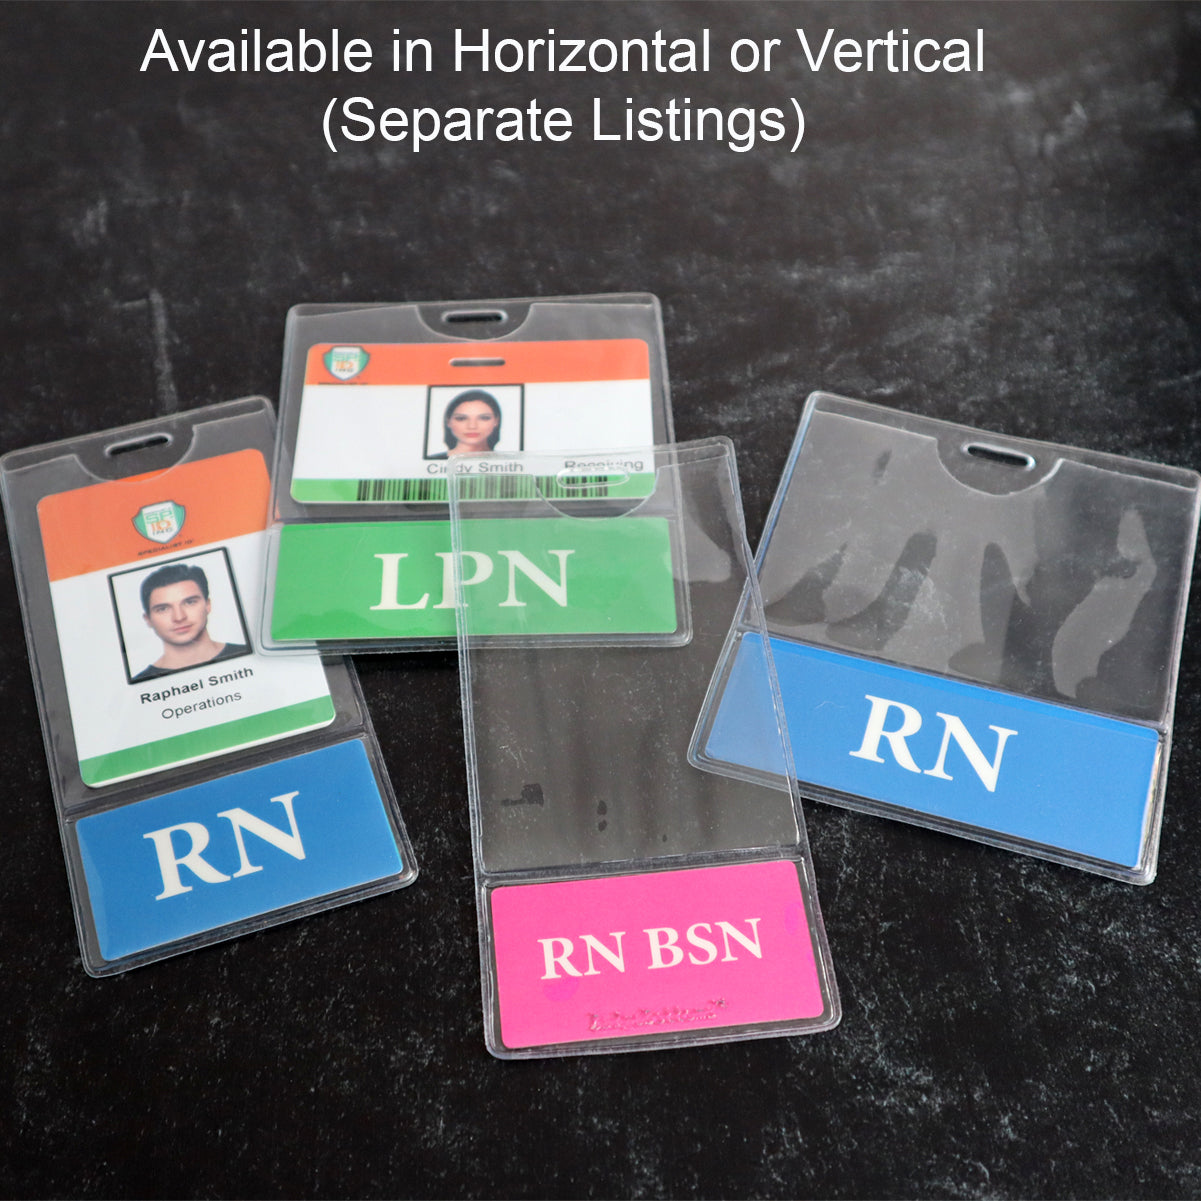 Four Custom Printed BadgeBottoms® Vertical (Badge Holder & Badge Buddy IN ONE!!) are displayed against a black background. The customizable badge holders feature photo IDs with labels: "LPN," "RN," and "RN BSN." The text above them reads, "Available in Horizontal or Vertical (Separate Listings).